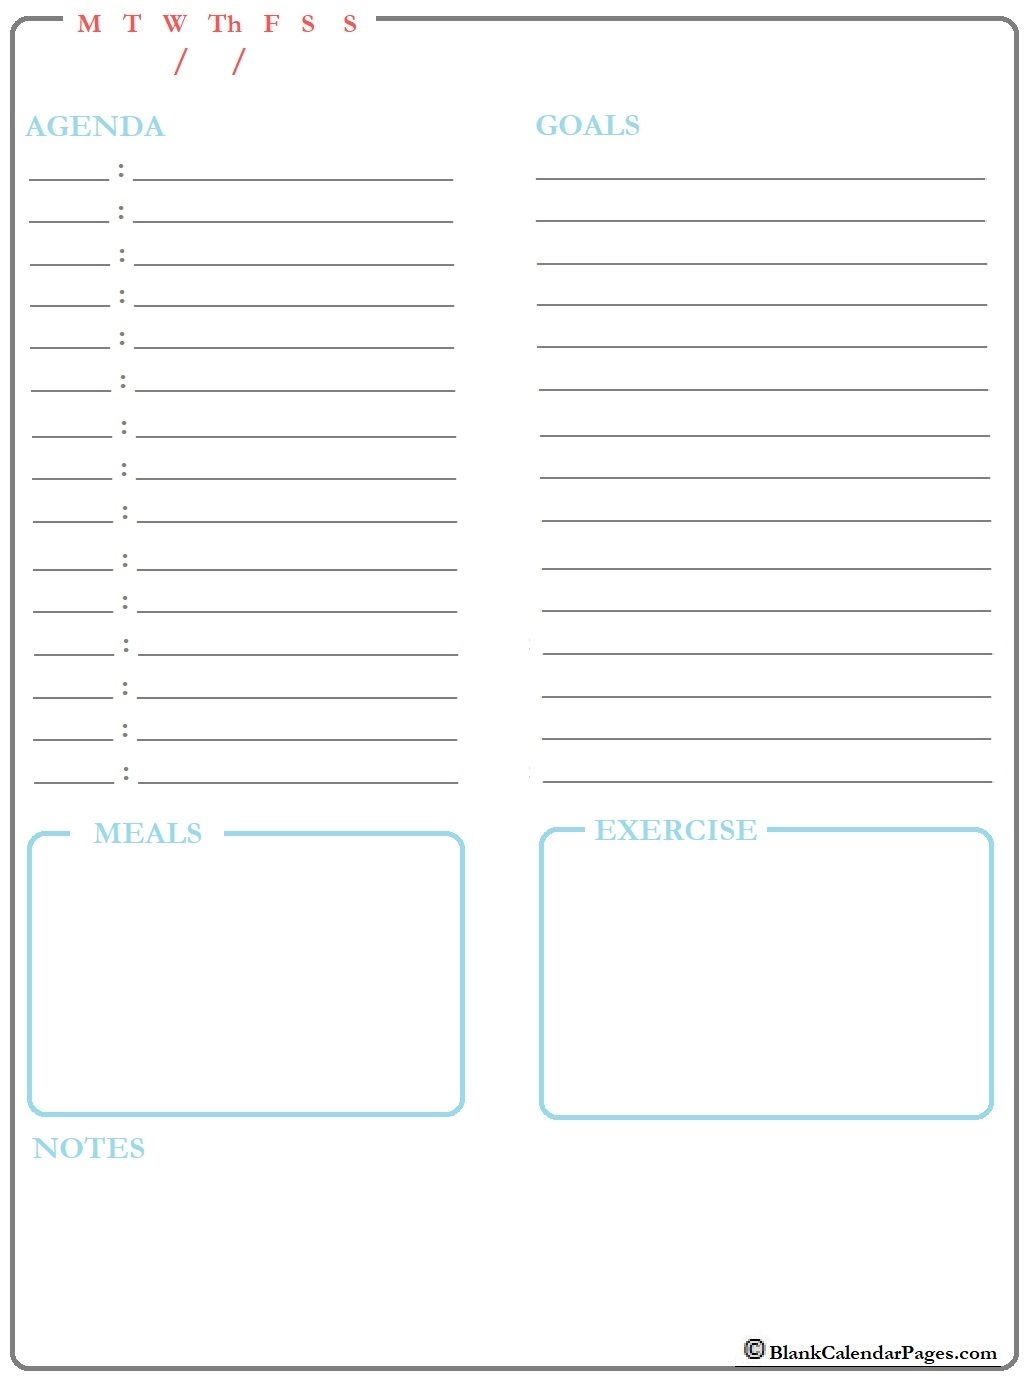 2020 printable daily planner | planner templates